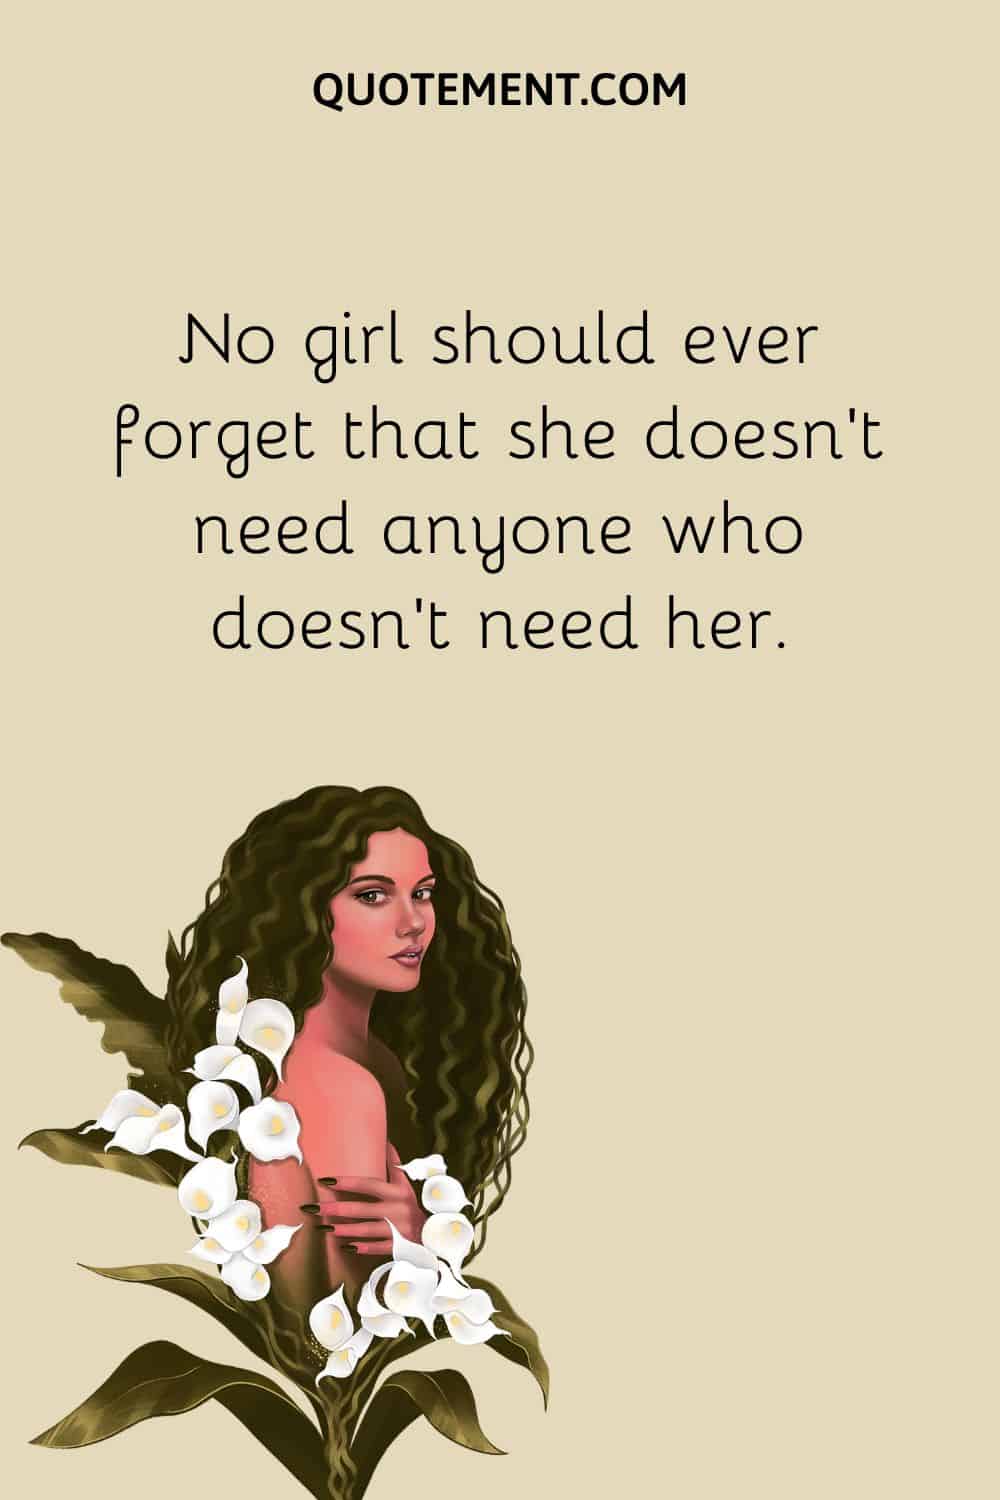 No girl should ever forget that she doesn’t need anyone who doesn’t need her